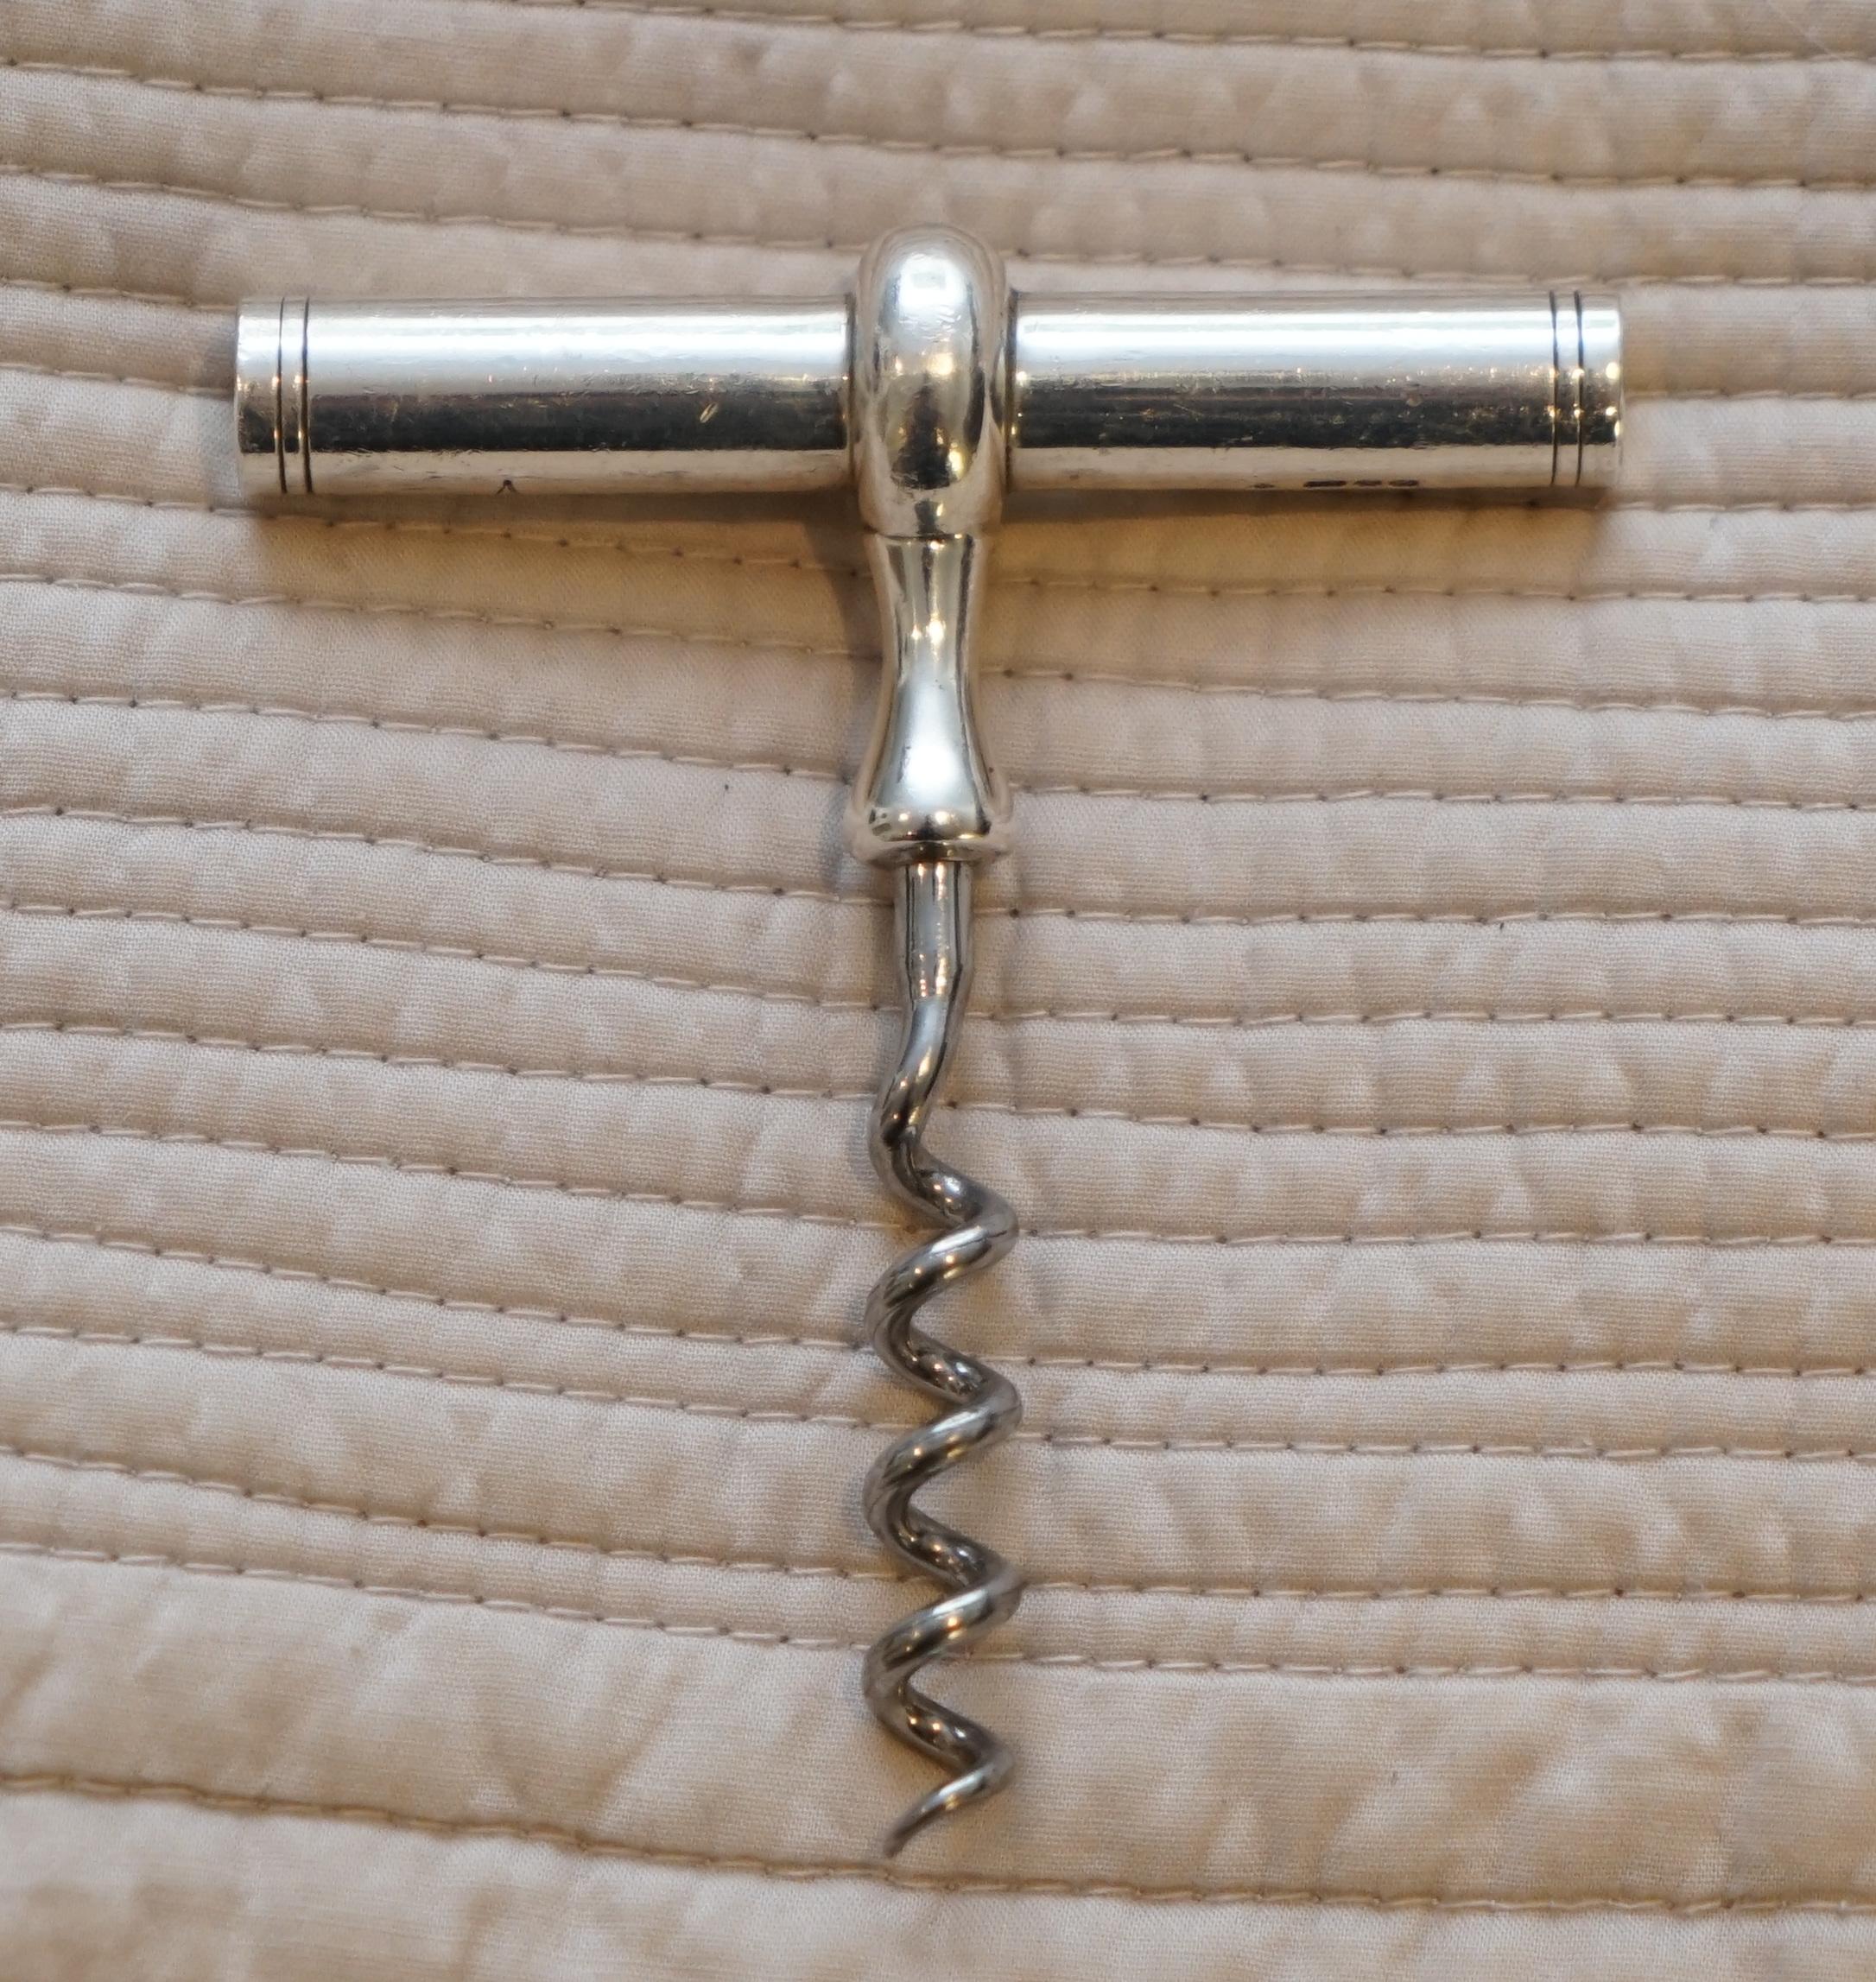 We are delighted to offer for sale this stunning very rare Asprey solid sterling silver corkscrew fully hallmarked for London, 1994.

A very good looking decorative piece, the screw is stainless steel so it won’t rust, the handle solid